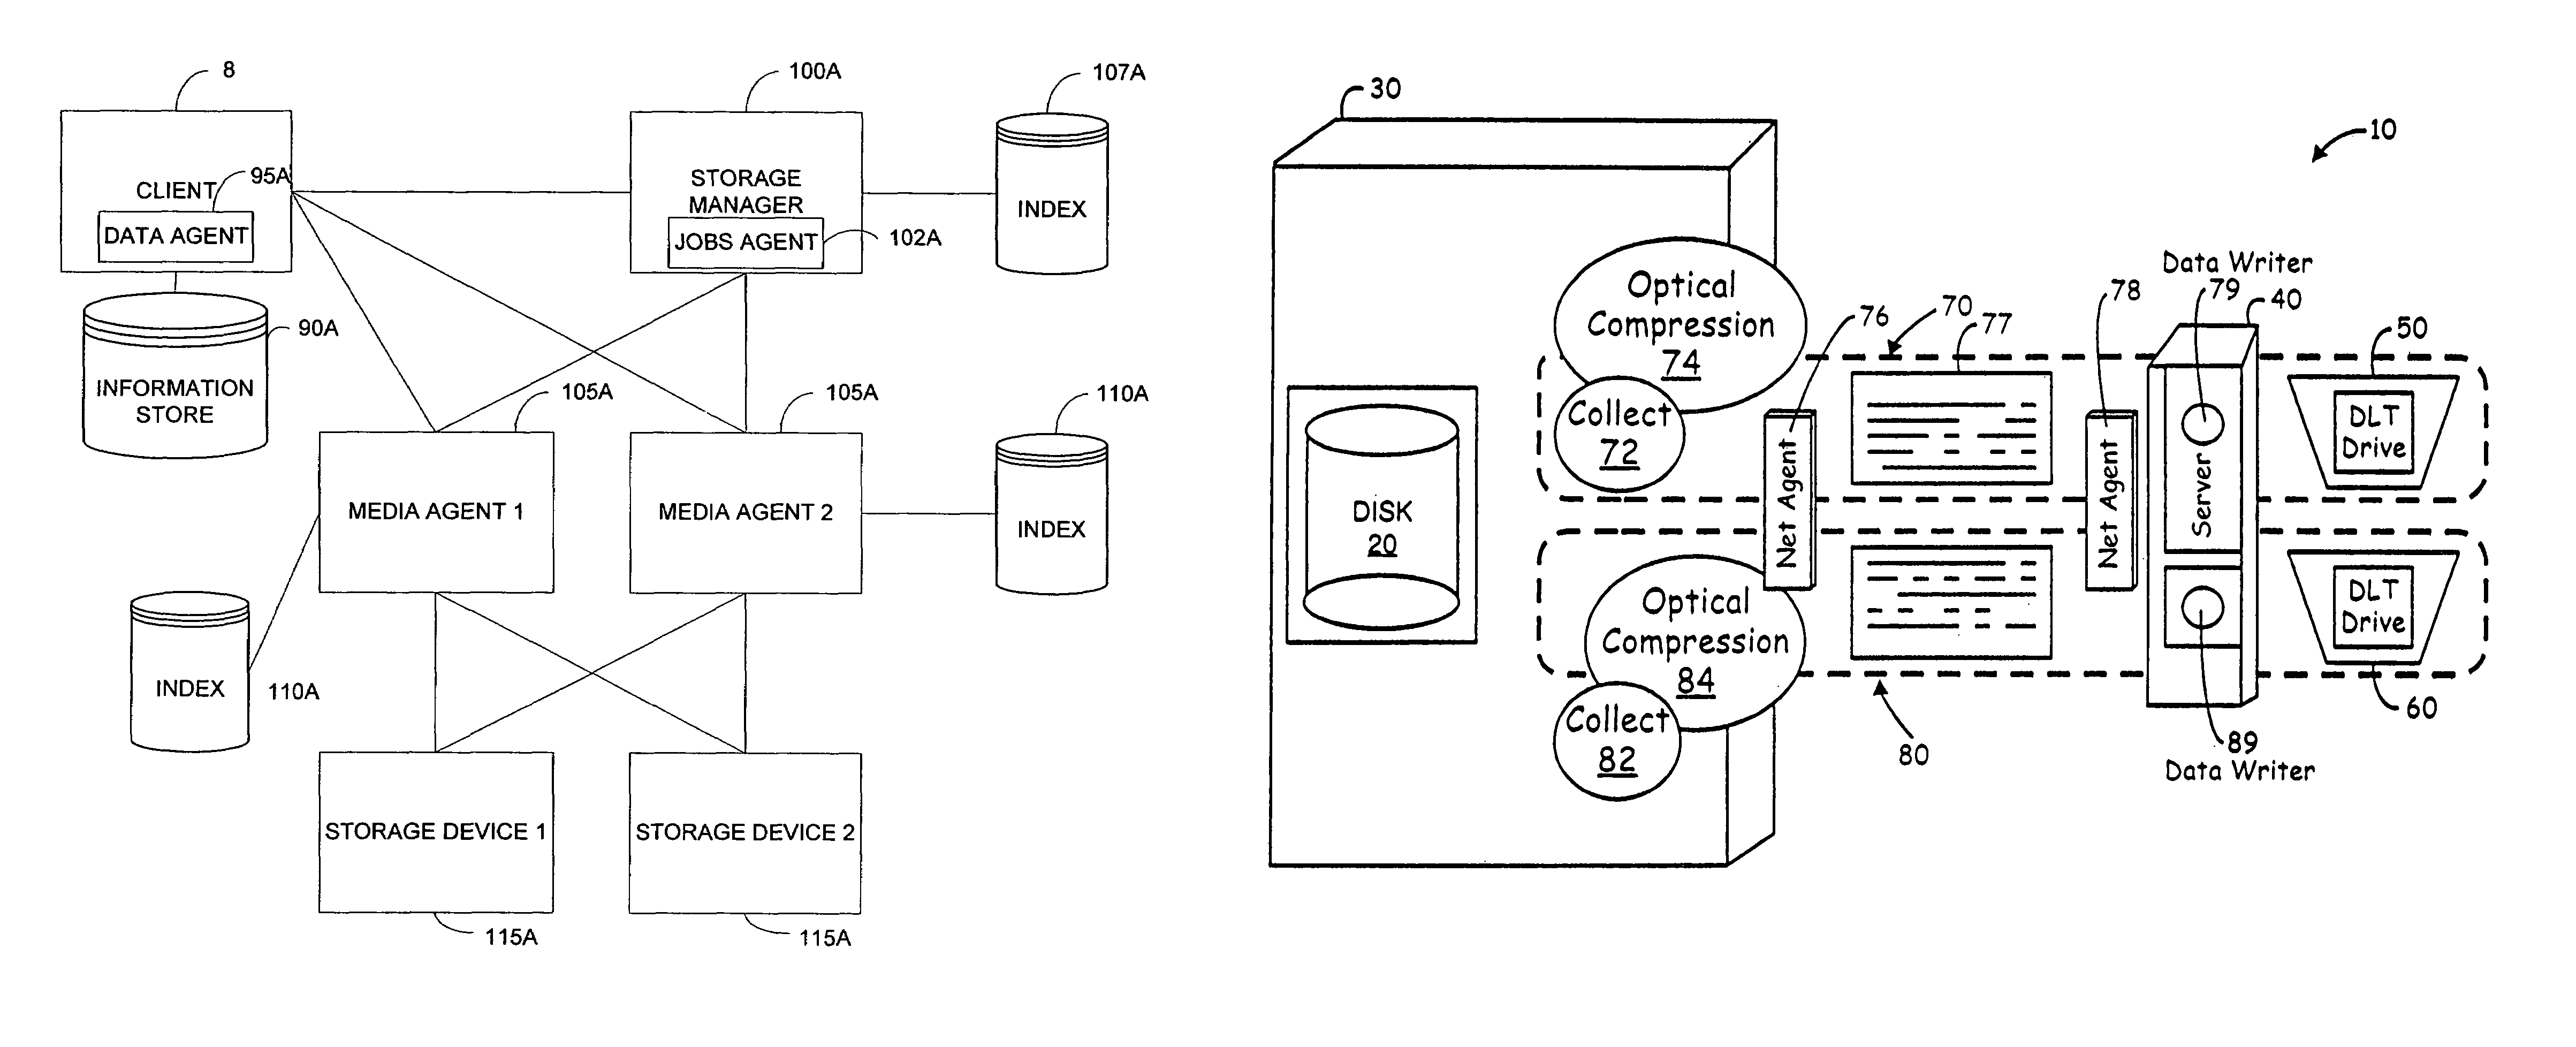 System and method for providing encryption in a storage network by storing a secured encryption key with encrypted archive data in an archive storage device